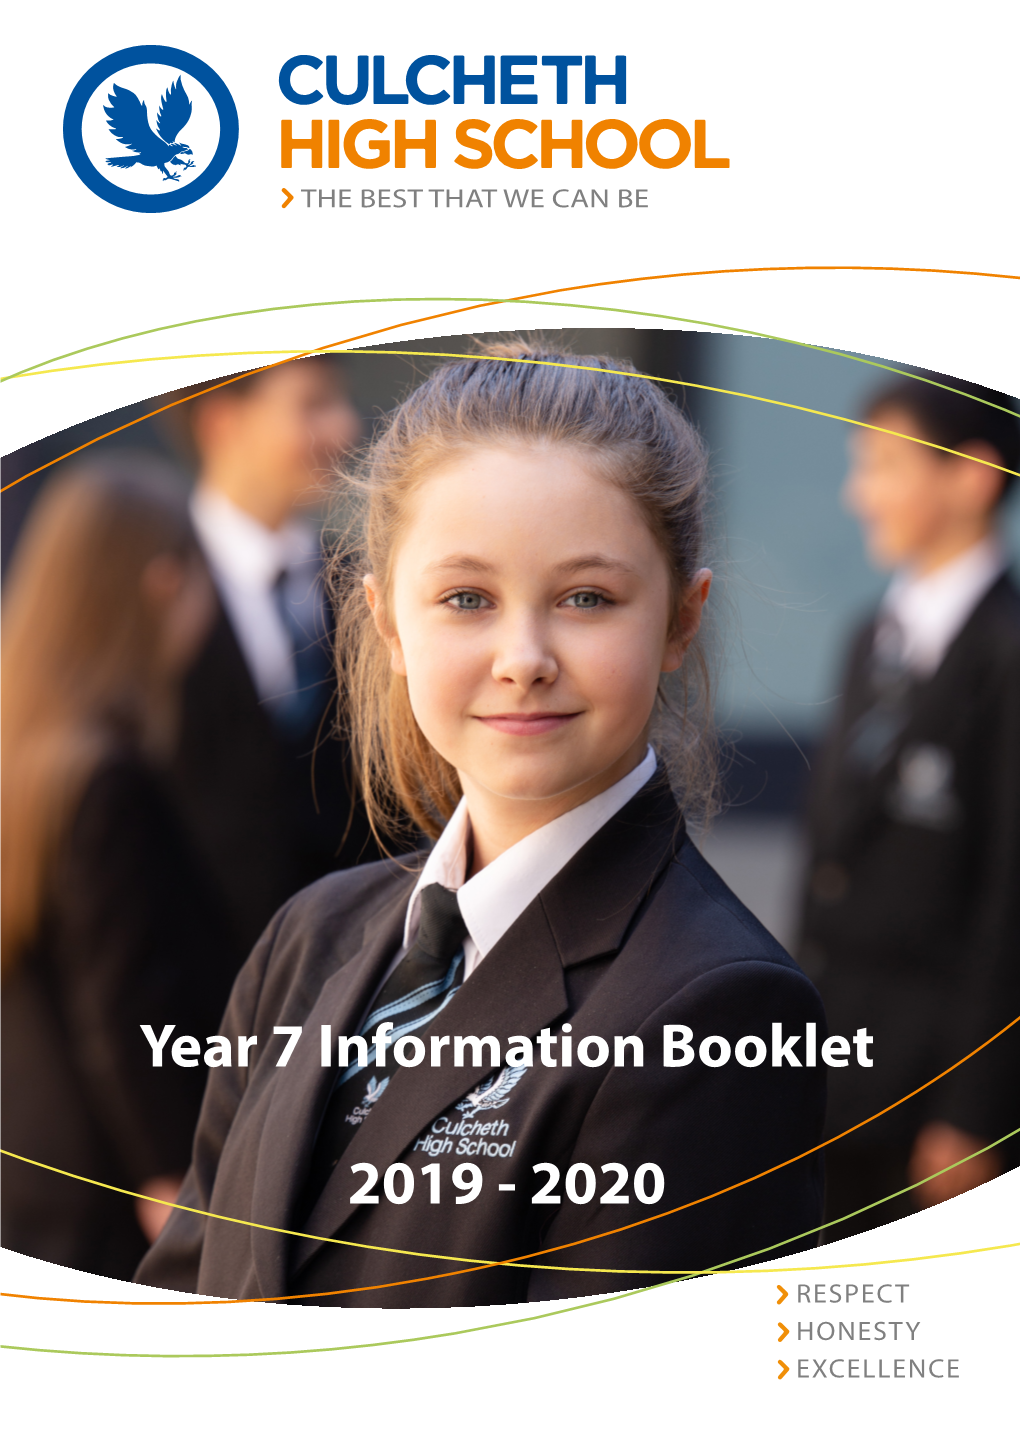 Year 7 Information Booklet 2019